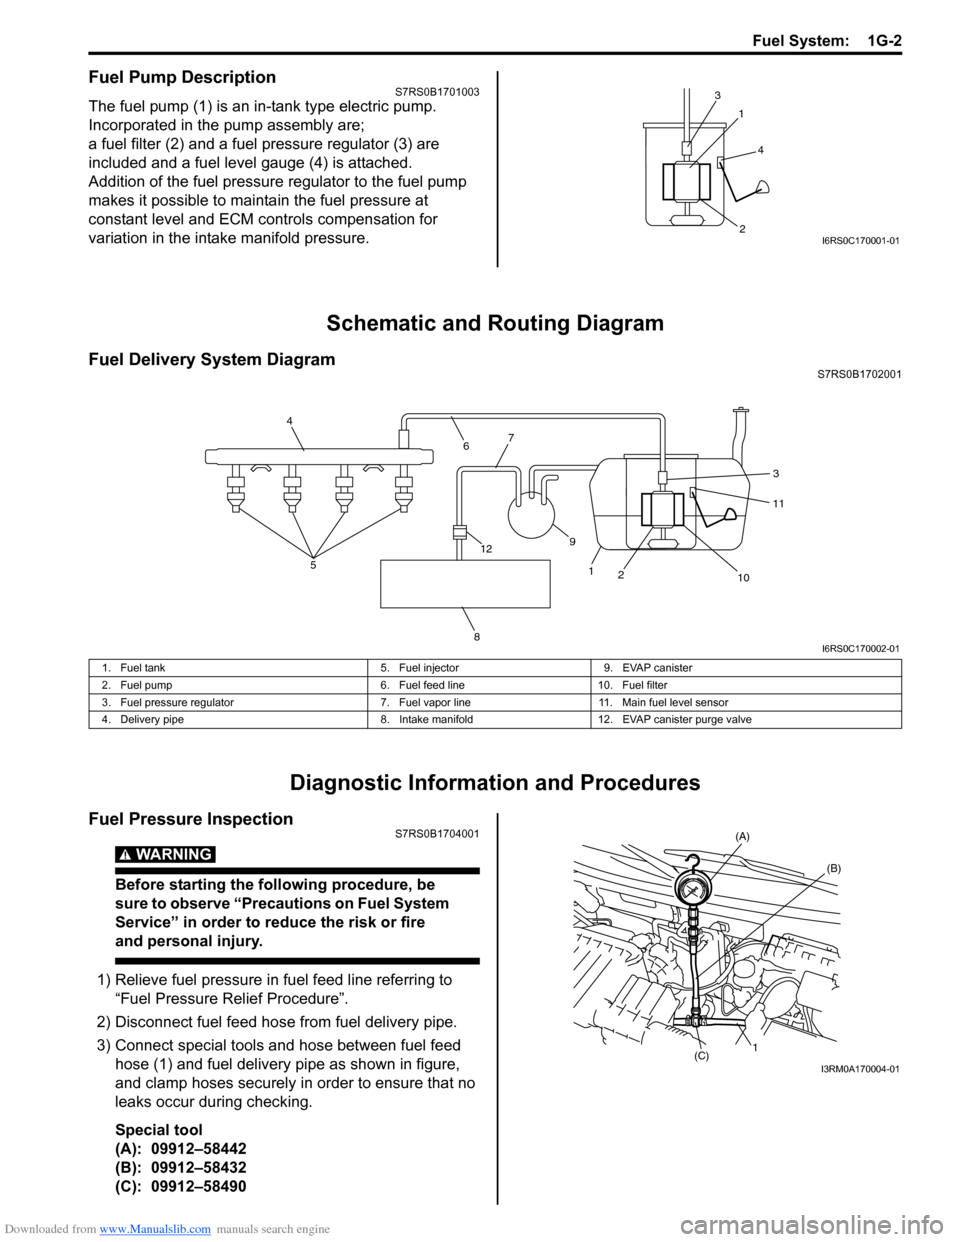 SUZUKI SWIFT 2005 2.G Service Workshop Manual Downloaded from www.Manualslib.com manuals search engine Fuel System:  1G-2
Fuel Pump DescriptionS7RS0B1701003
The fuel pump (1) is an in-tank type electric pump. 
Incorporated in the pump assembly ar